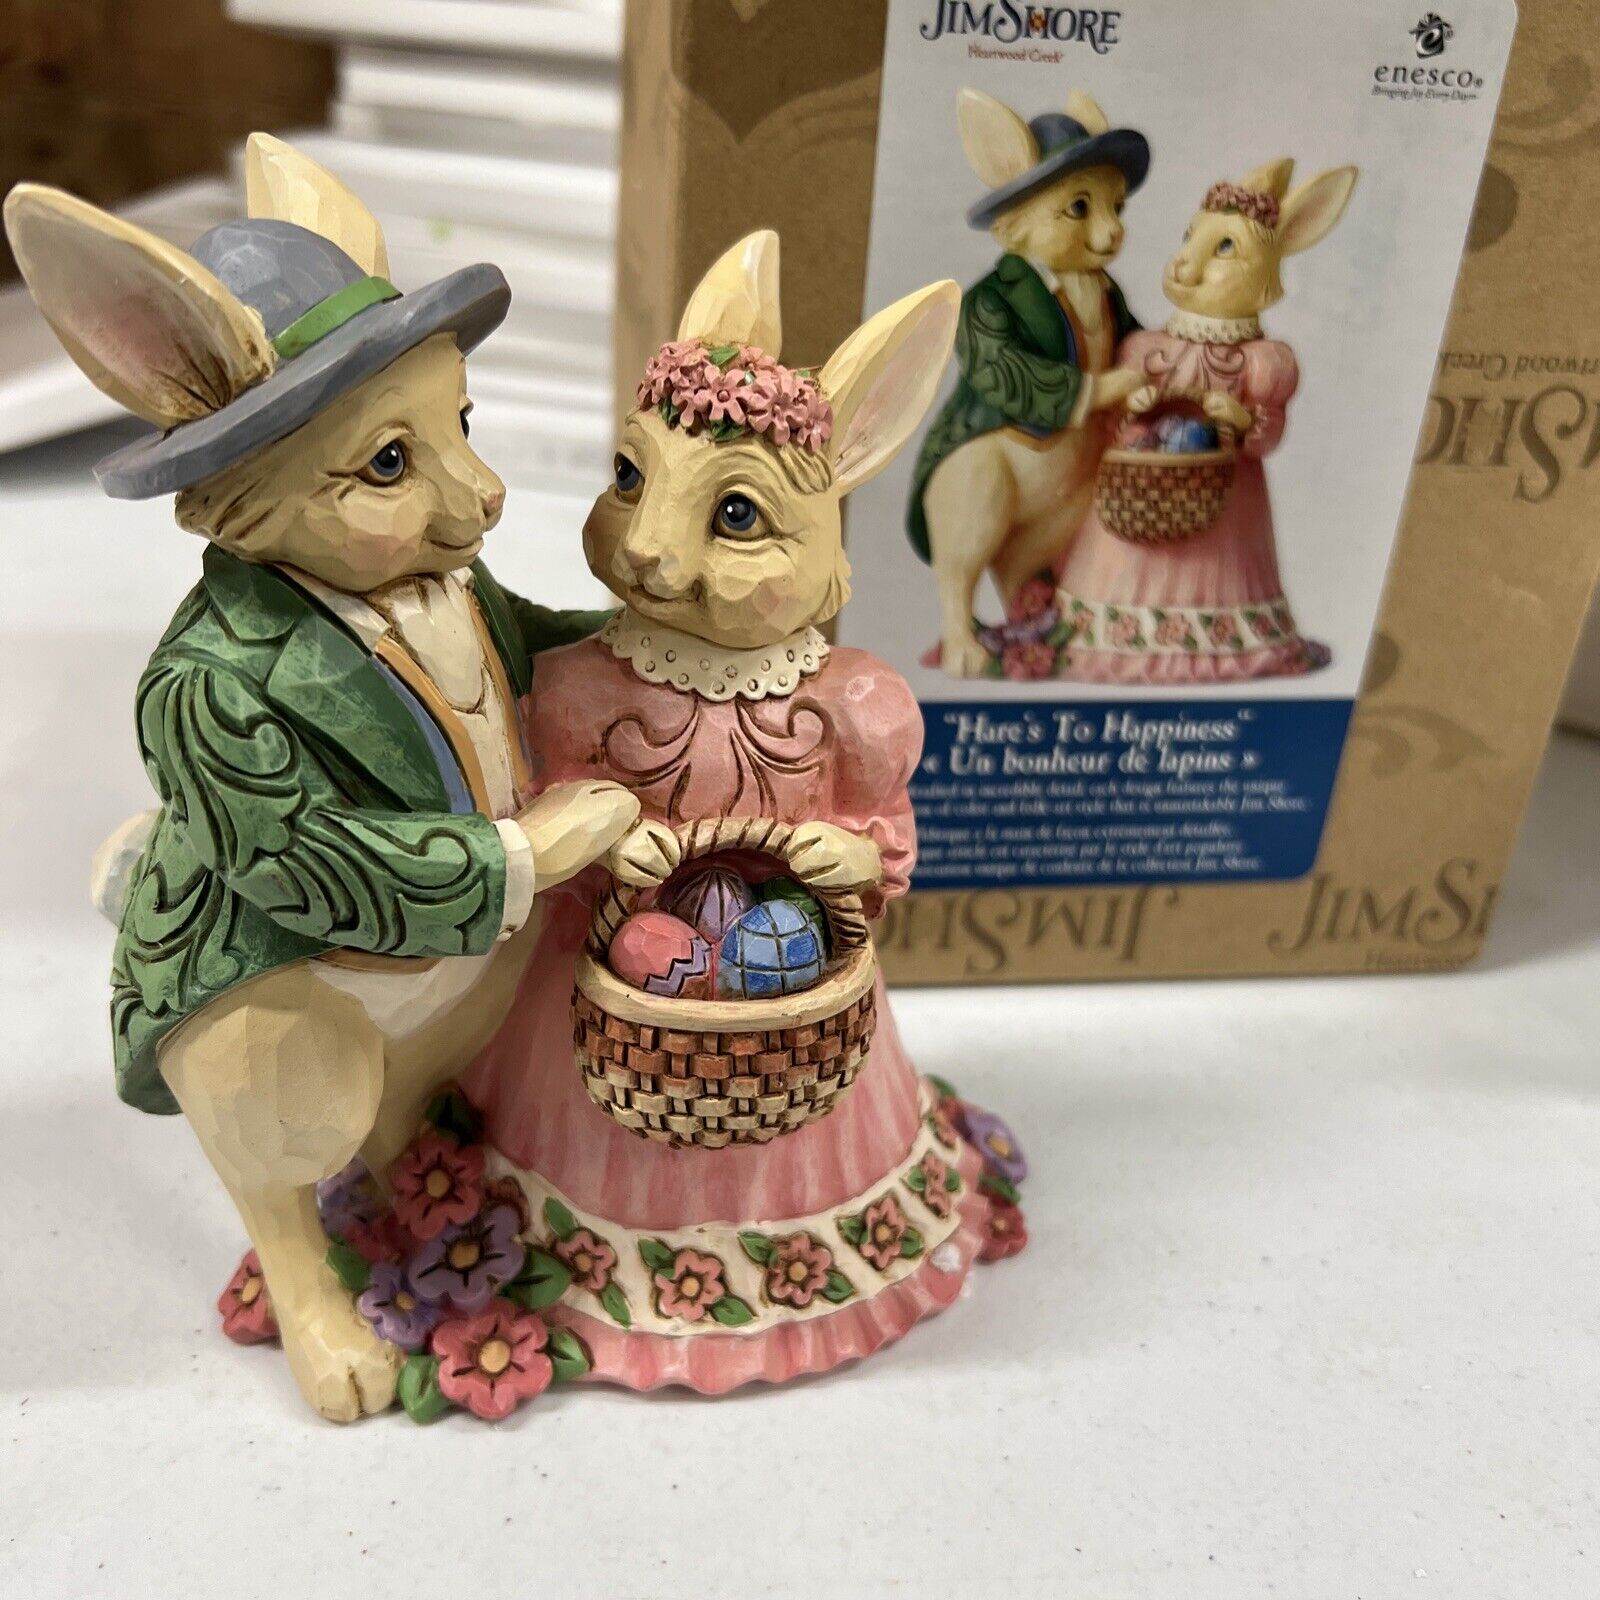 Jim Shore Hares to Happiness Easter Figurine Heartwood Creek 6006232